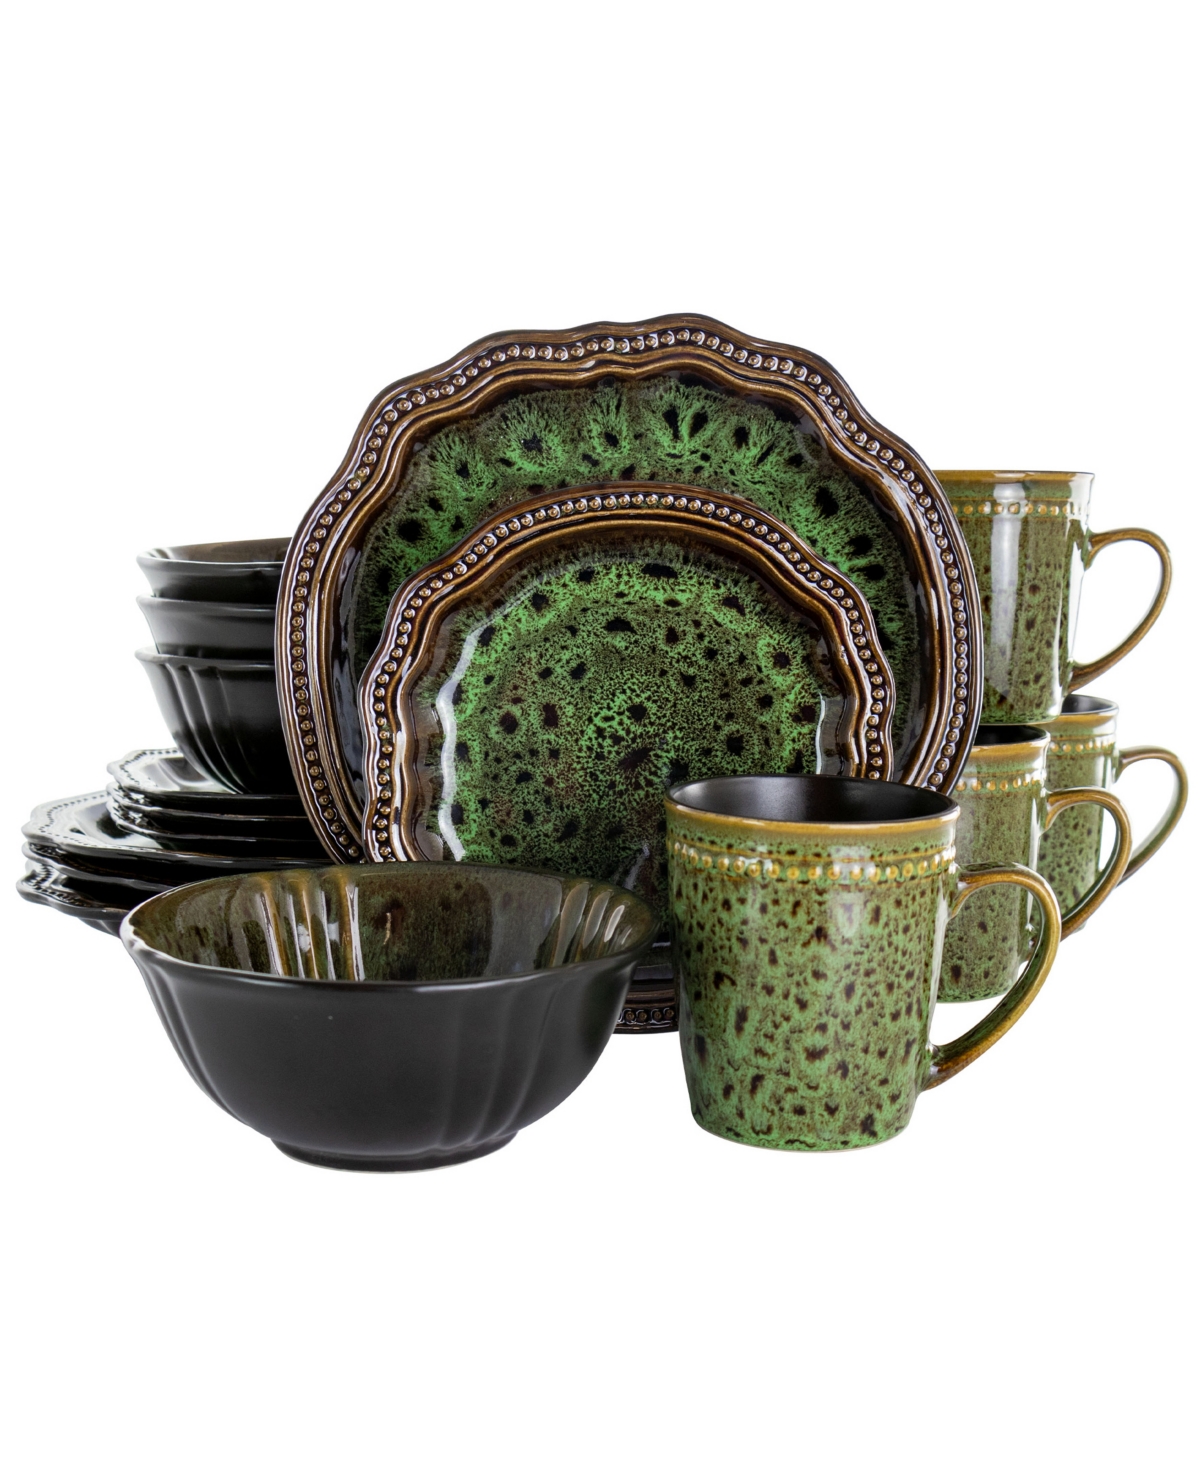 Scalloped Magdalena 16 Piece Stoneware Dinnerware Set, Service for 4 - Green